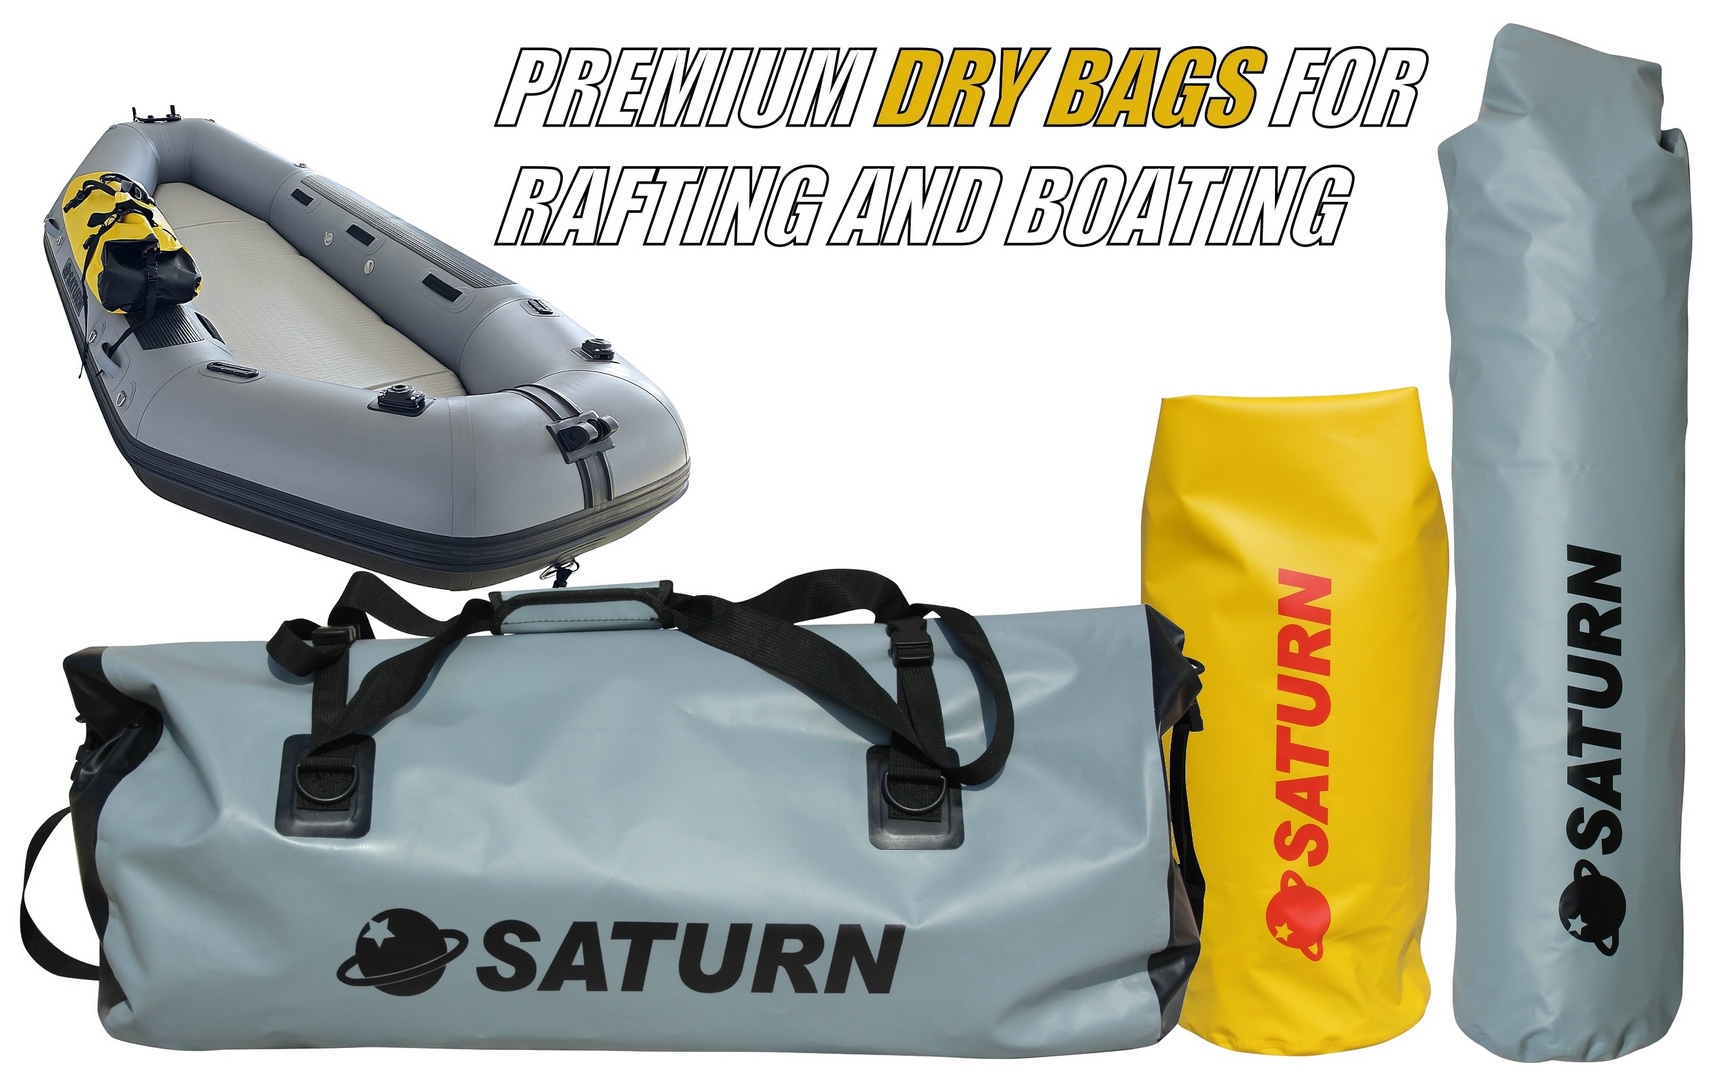 Saturn Dry Bags for Inflatable Boats, Rafts, Kayaks and Paddle Boards.